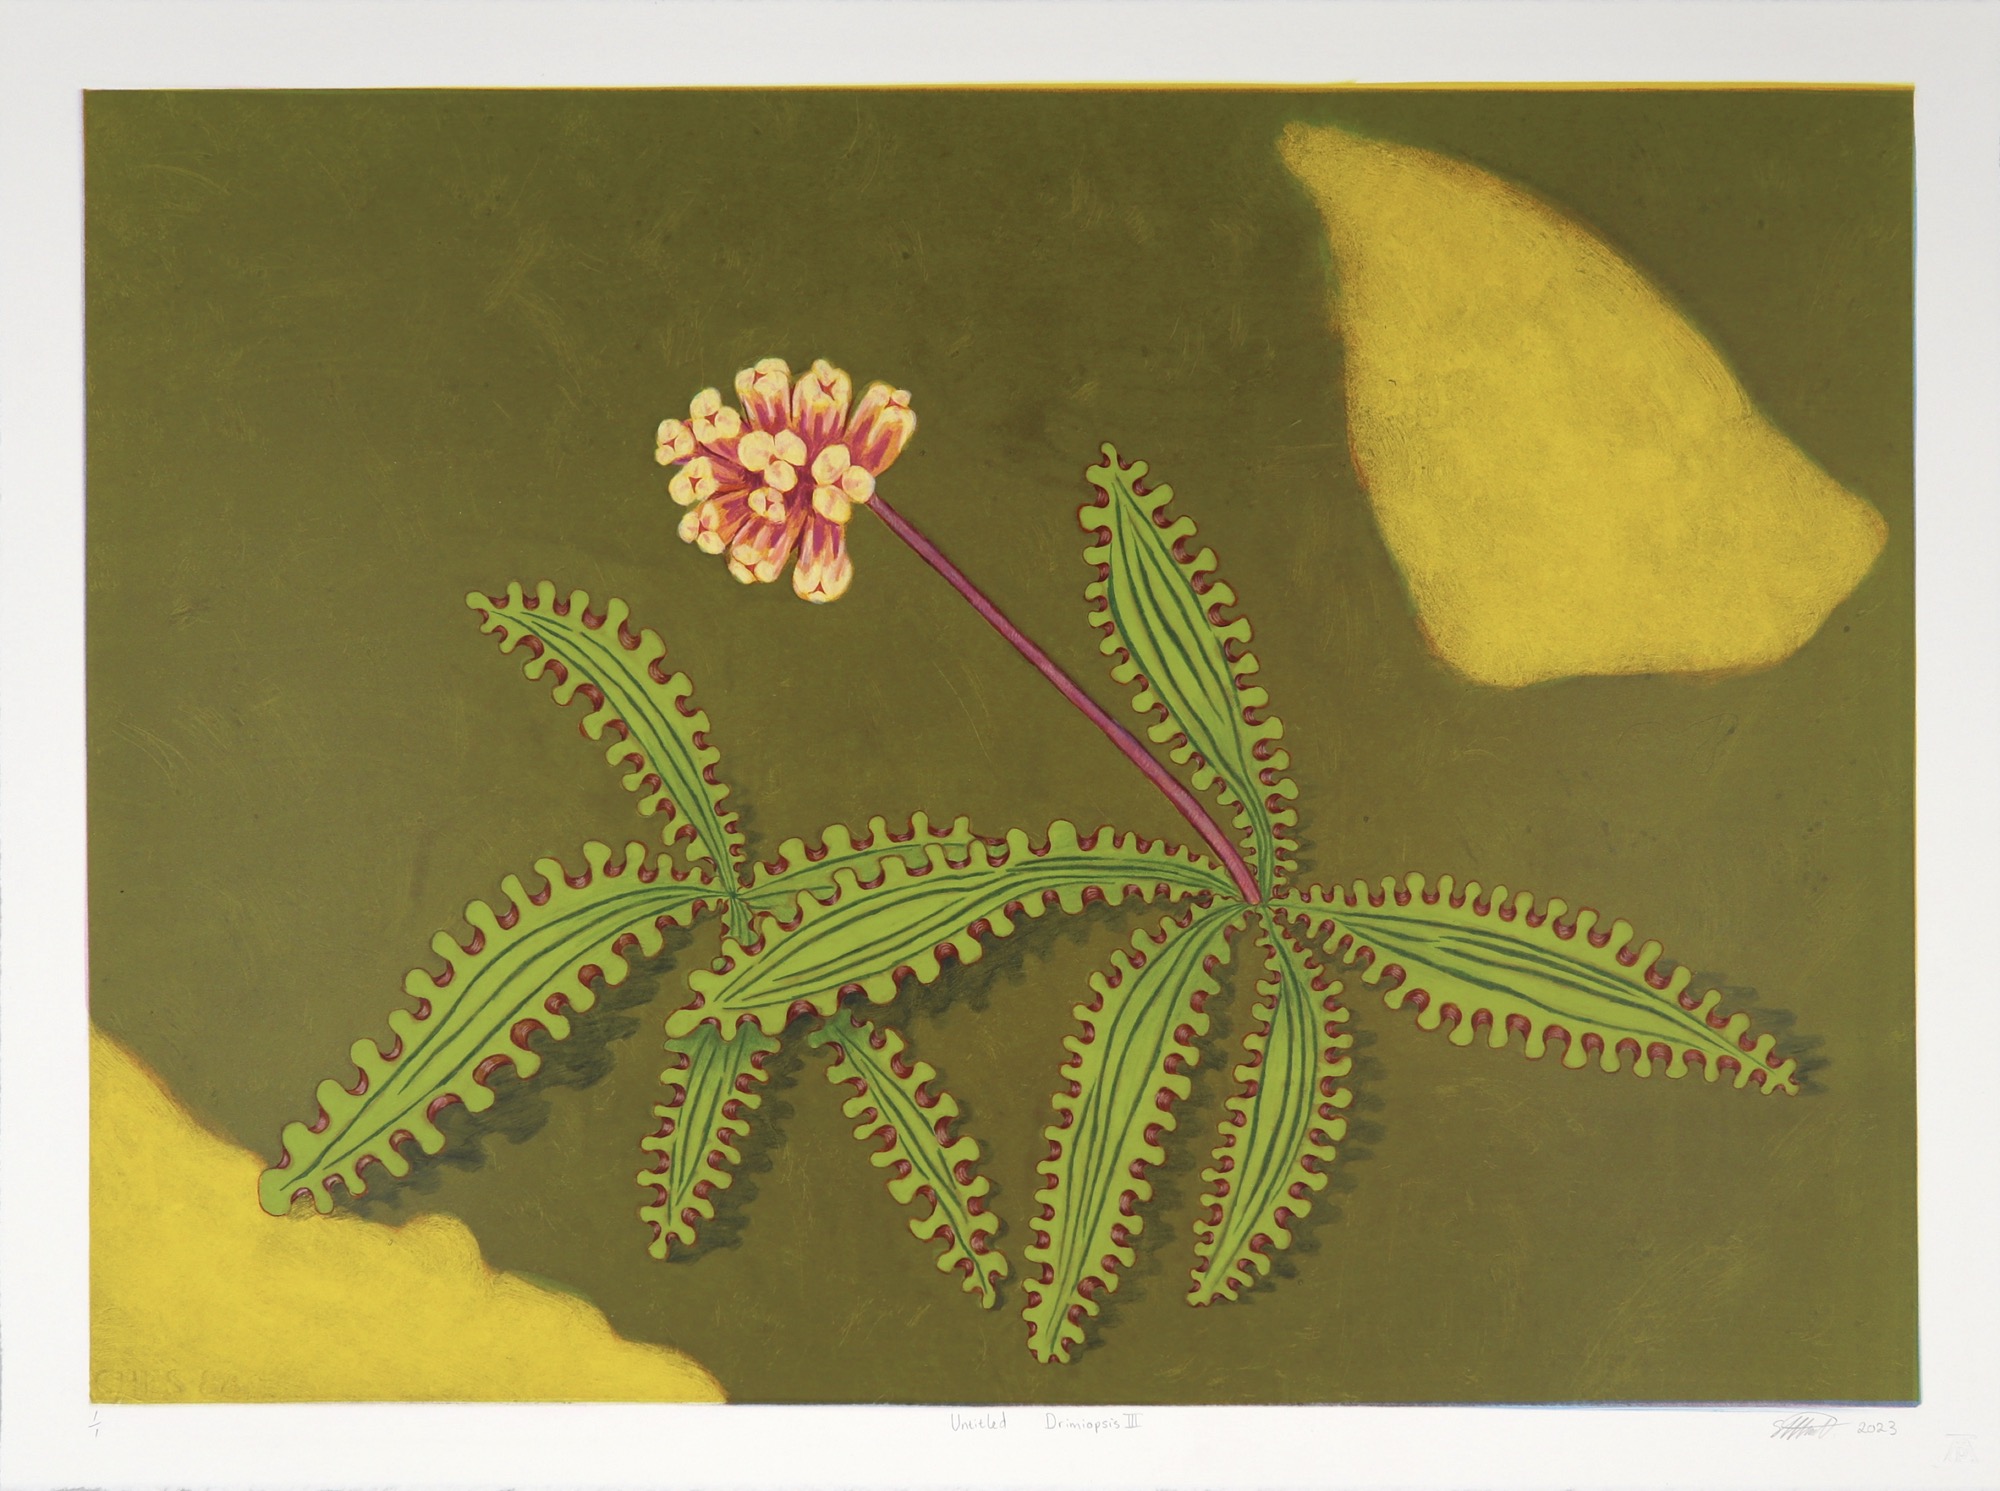 Simon Attwood monotype showing drimiopsis plant in flower